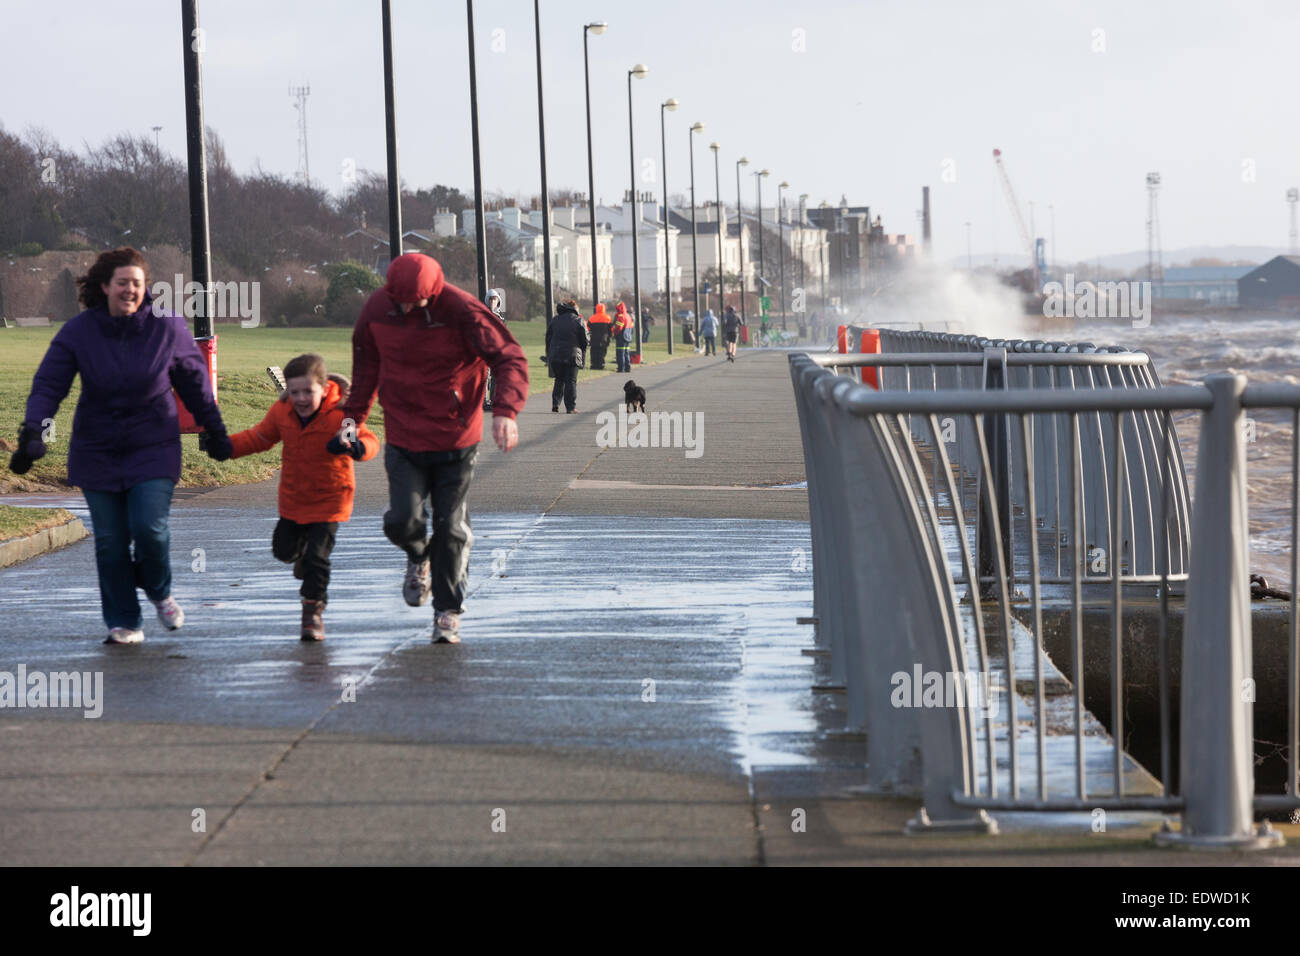 Liverpool, Merseyside, UK. 10th January, 2015. A family run to avoid getting soaked by waves at Otterspool Promenade, Liverpool Credit:  Adam Vaughan/Alamy Live News Stock Photo